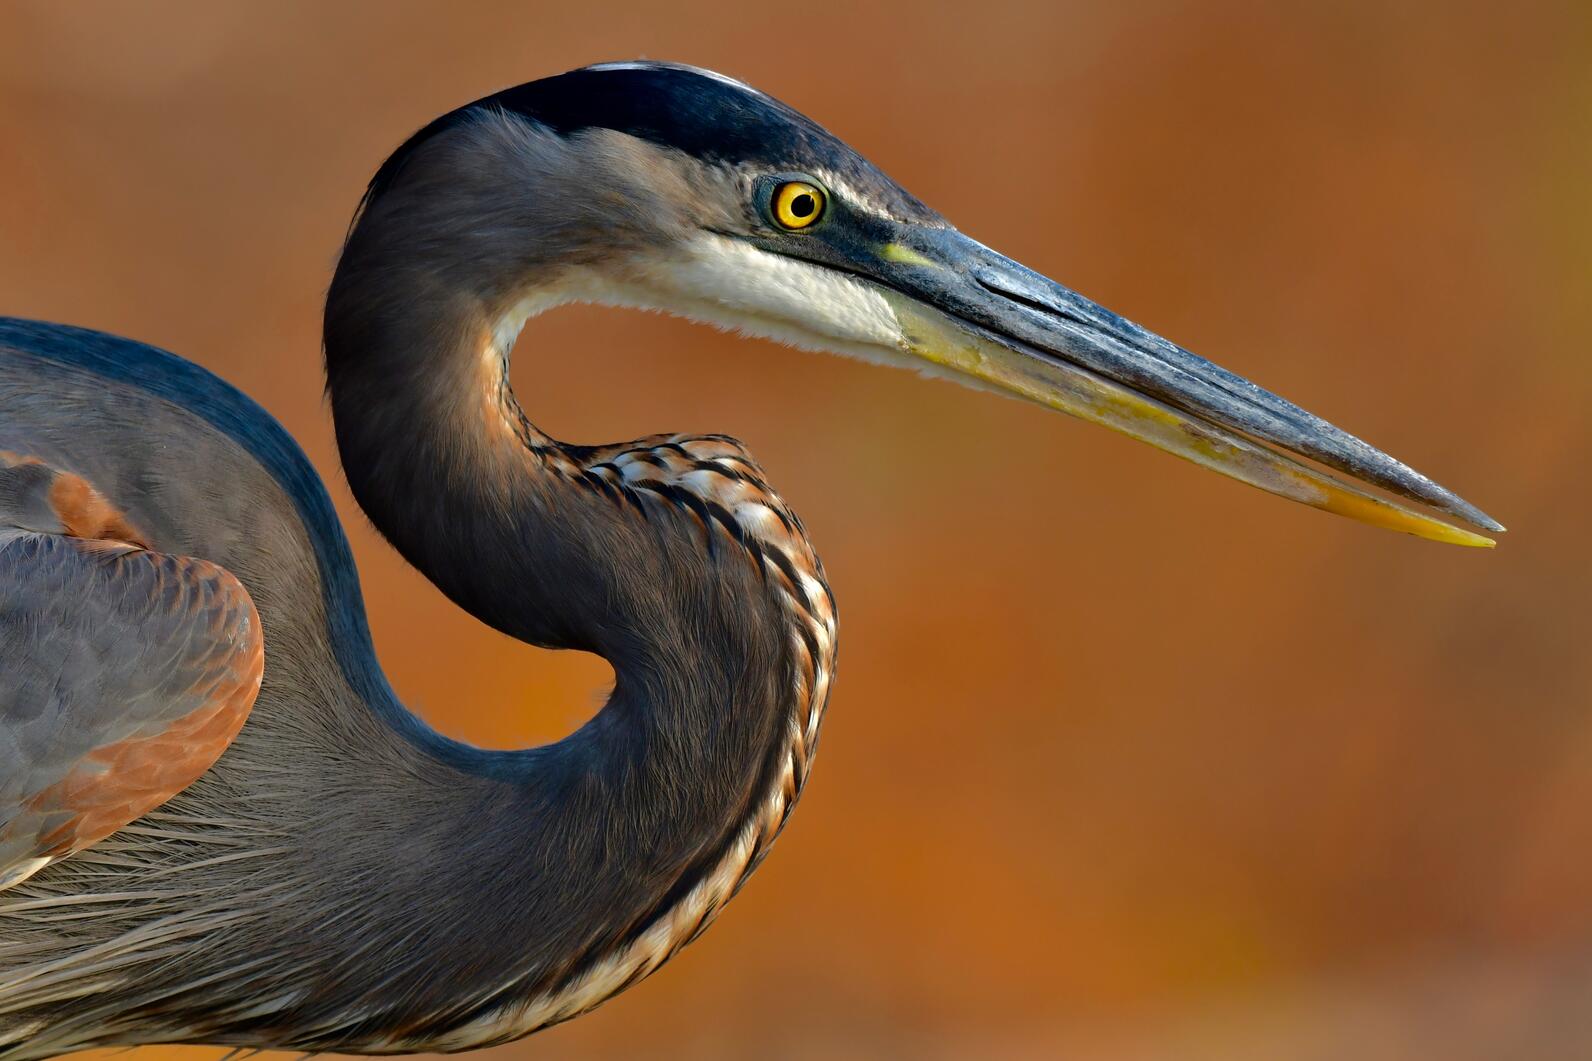 Close up profile of a Great Blue Heron against an orange background